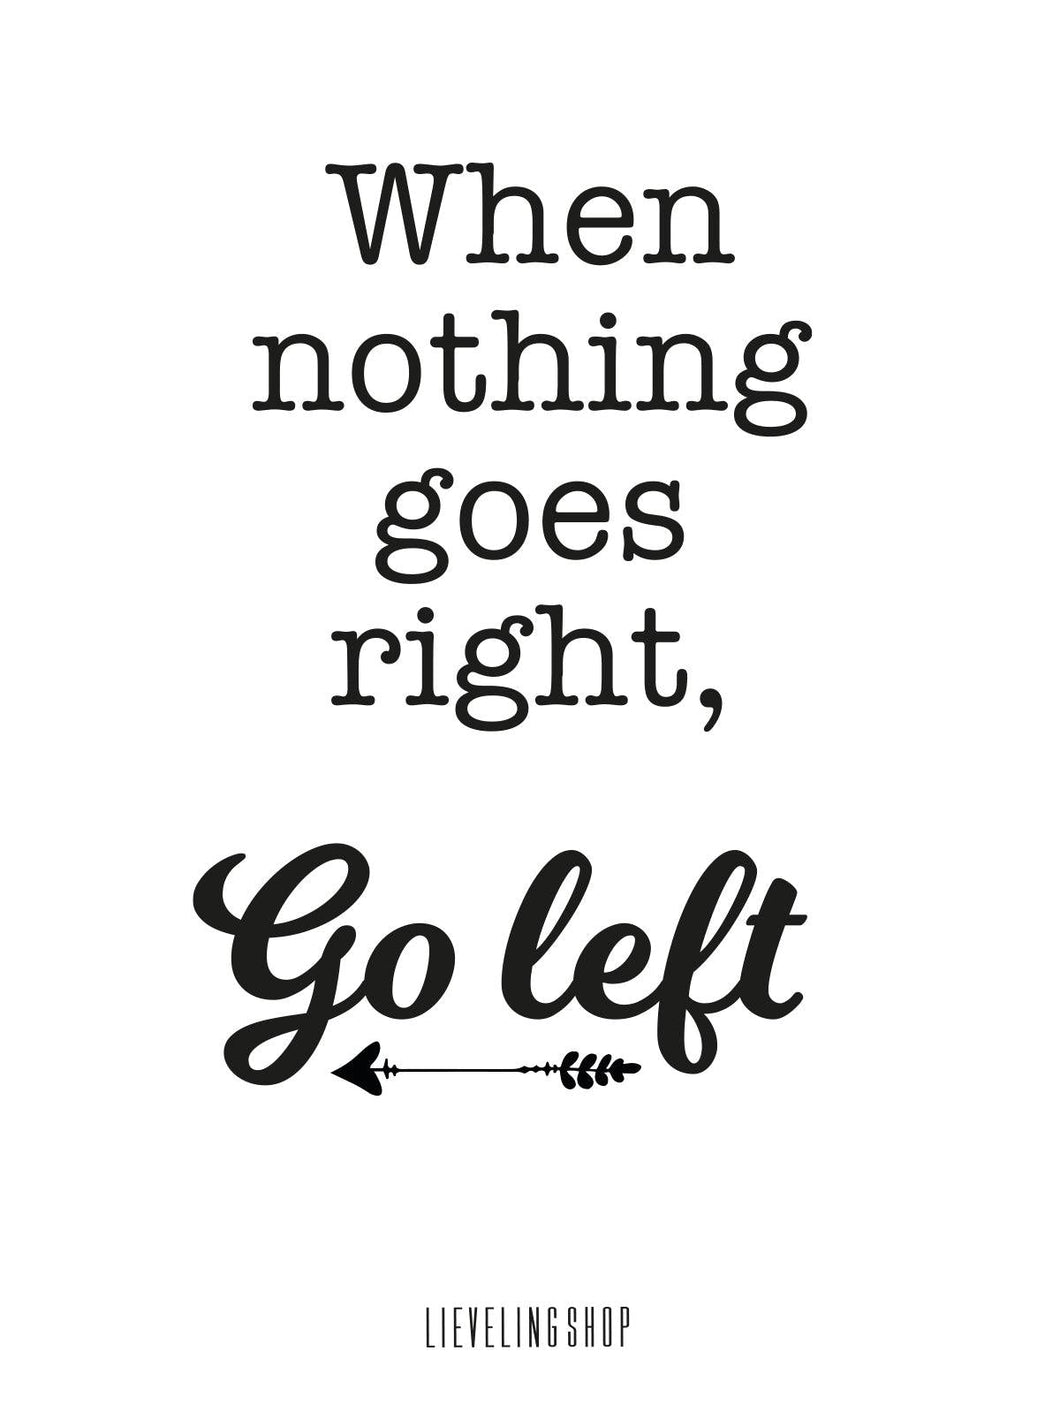 Ansichtkaart - When nothing goes right - Lievelingshop